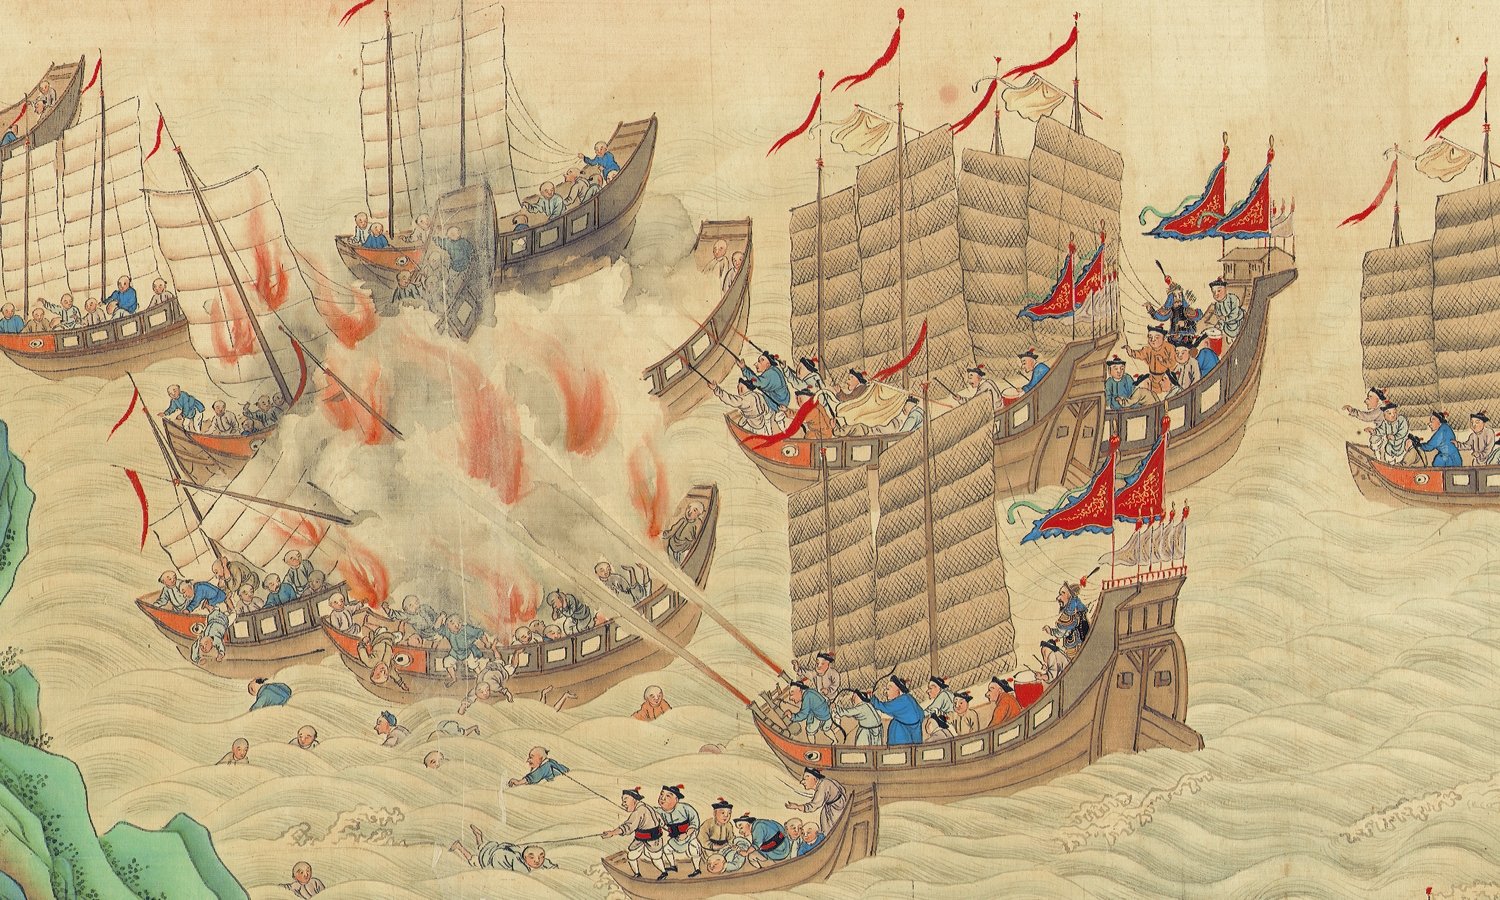 Portion of a Qing scroll on battling 19th Century piracy in the South China Sea